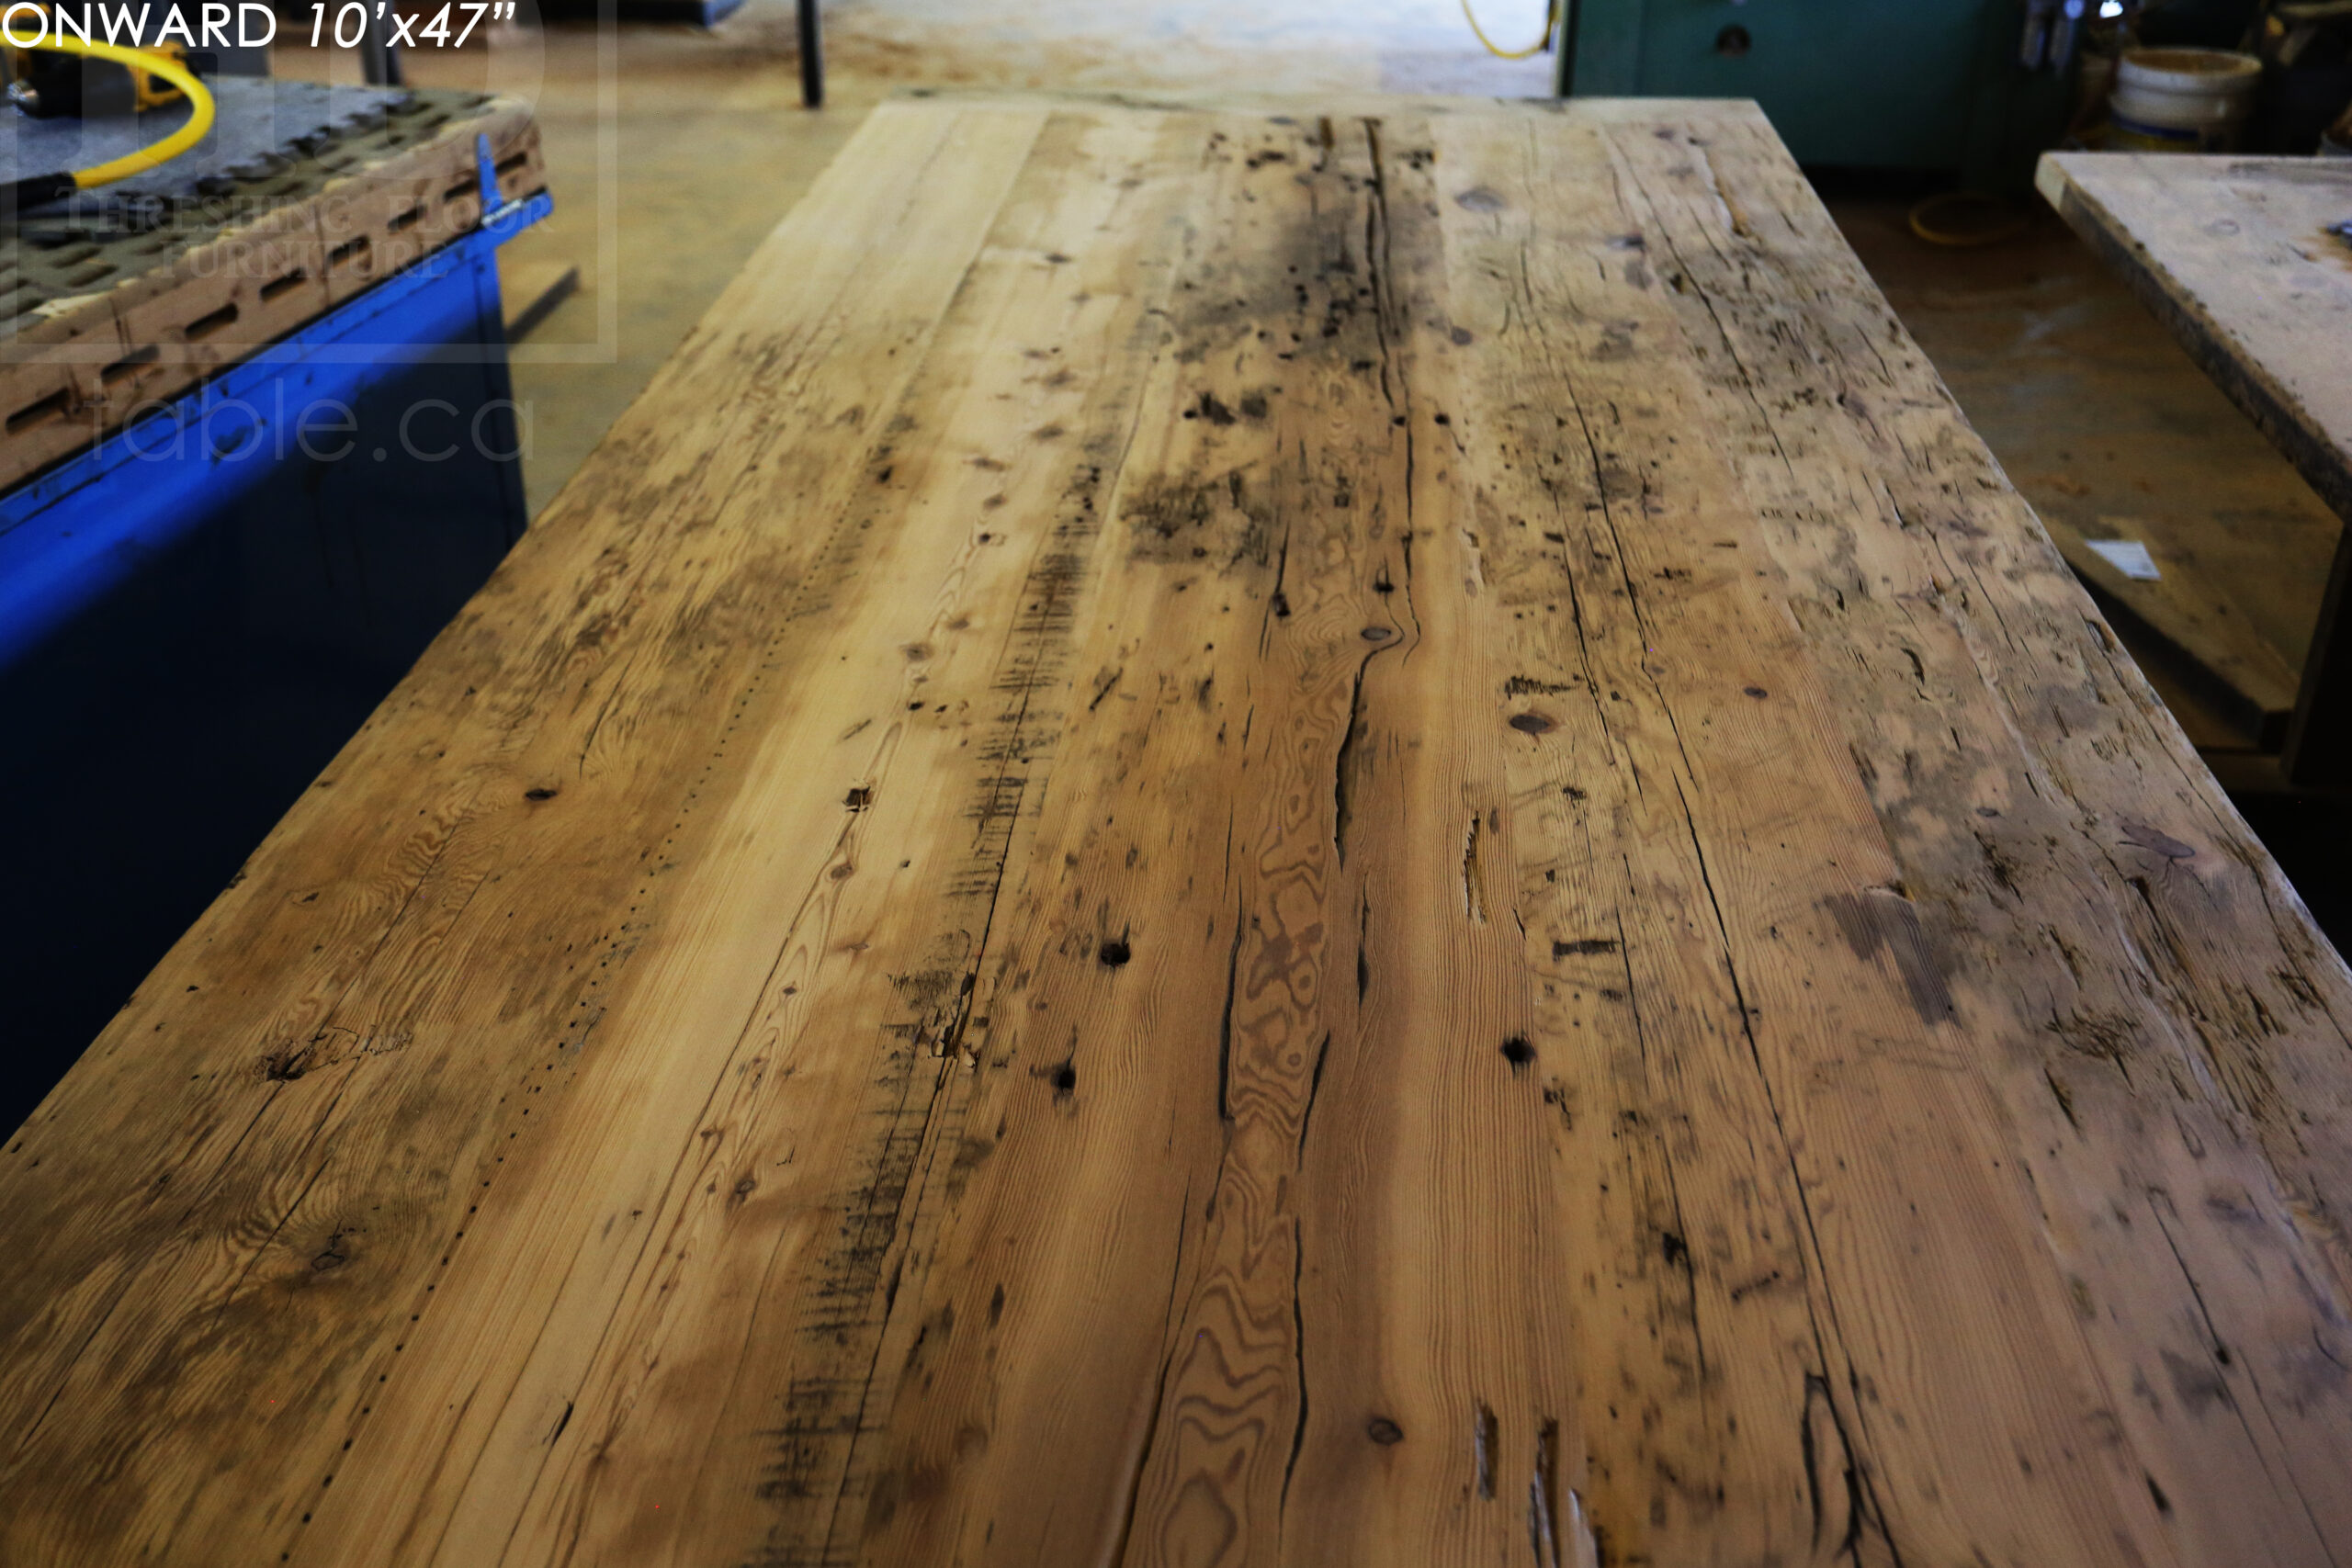 10 ft Reclaimed Wood Boardroom Table - 47" wide - Reclaimed Hemlock Threshing Floor Construction - Original edges & distressing maintained - Modern Plank style base - Custom metal logo routered into top - Premium epoxy + satin polyurethane finish / www.table.ca